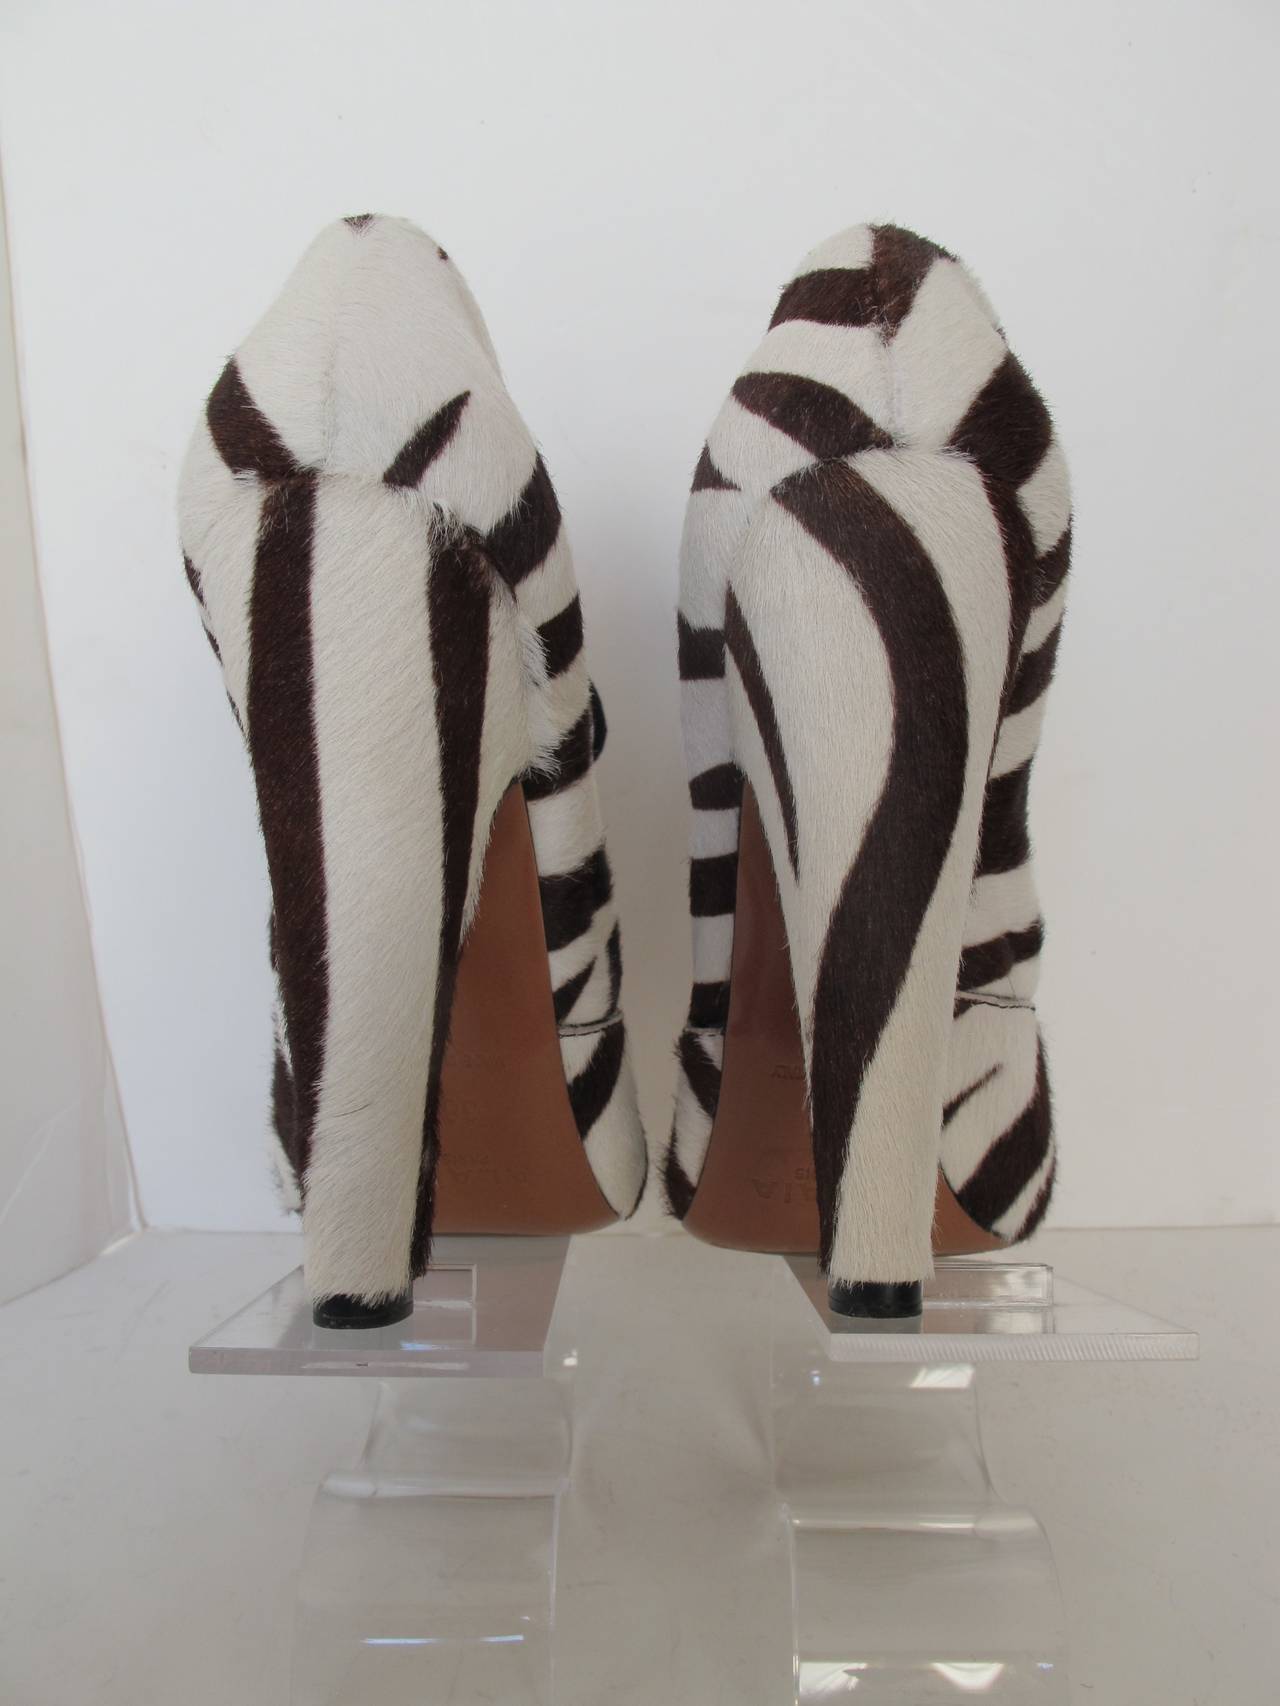 Alaia Brown and White Zebra Shoes In Excellent Condition For Sale In San Francisco, CA